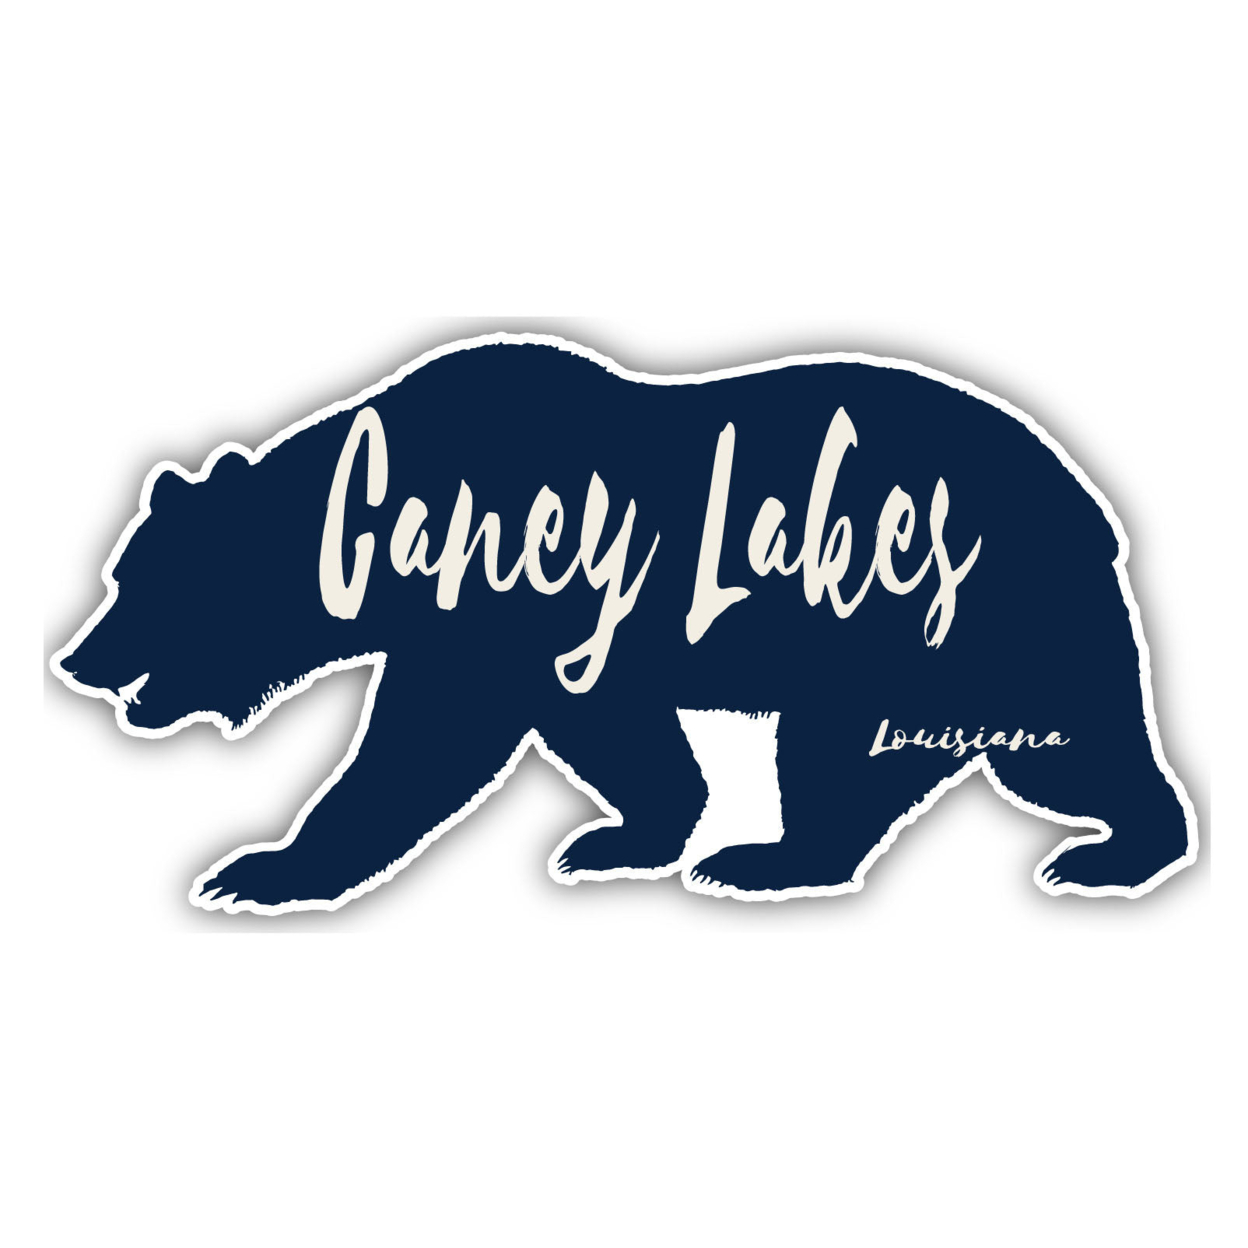 Caney Lakes Louisiana Souvenir Decorative Stickers (Choose Theme And Size) - 4-Pack, 8-Inch, Bear